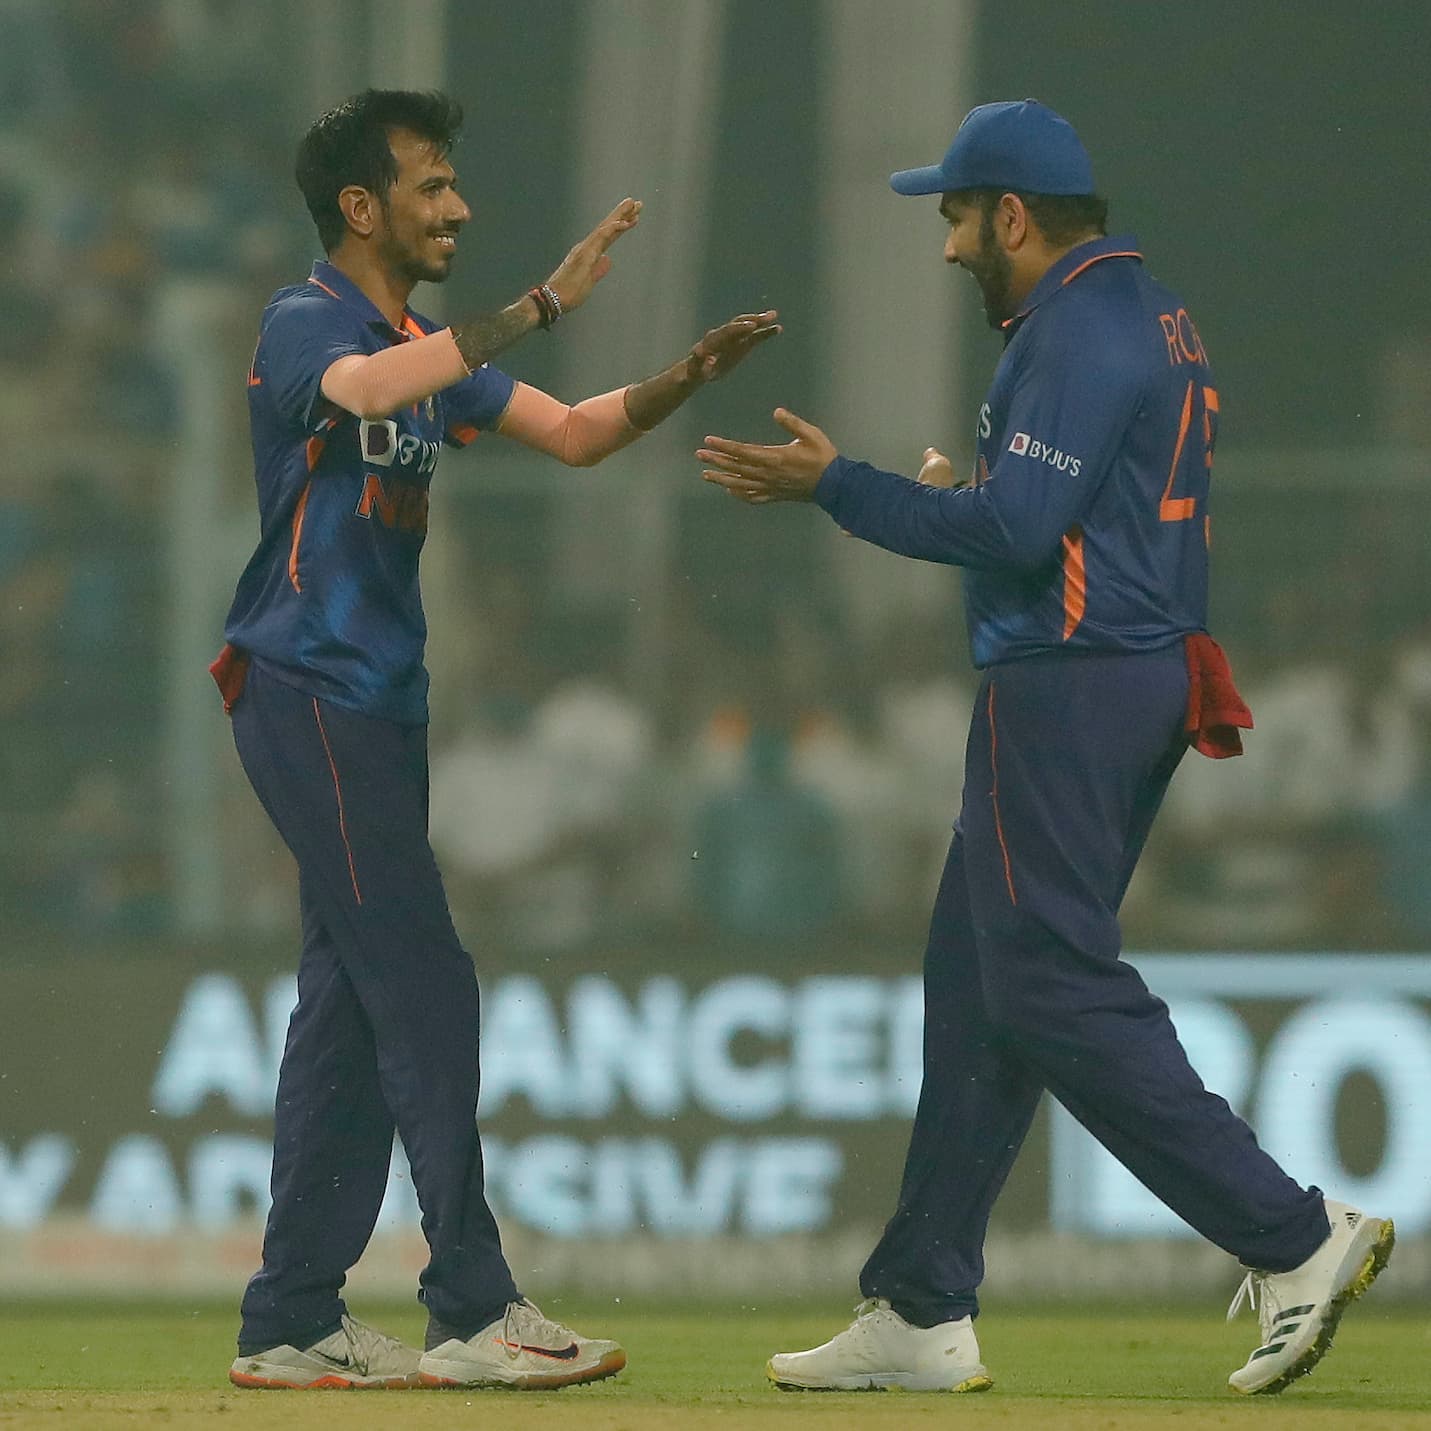 India vs West Indies 2022 | Watch: Yuzvendra Chahal's straight drive against WI